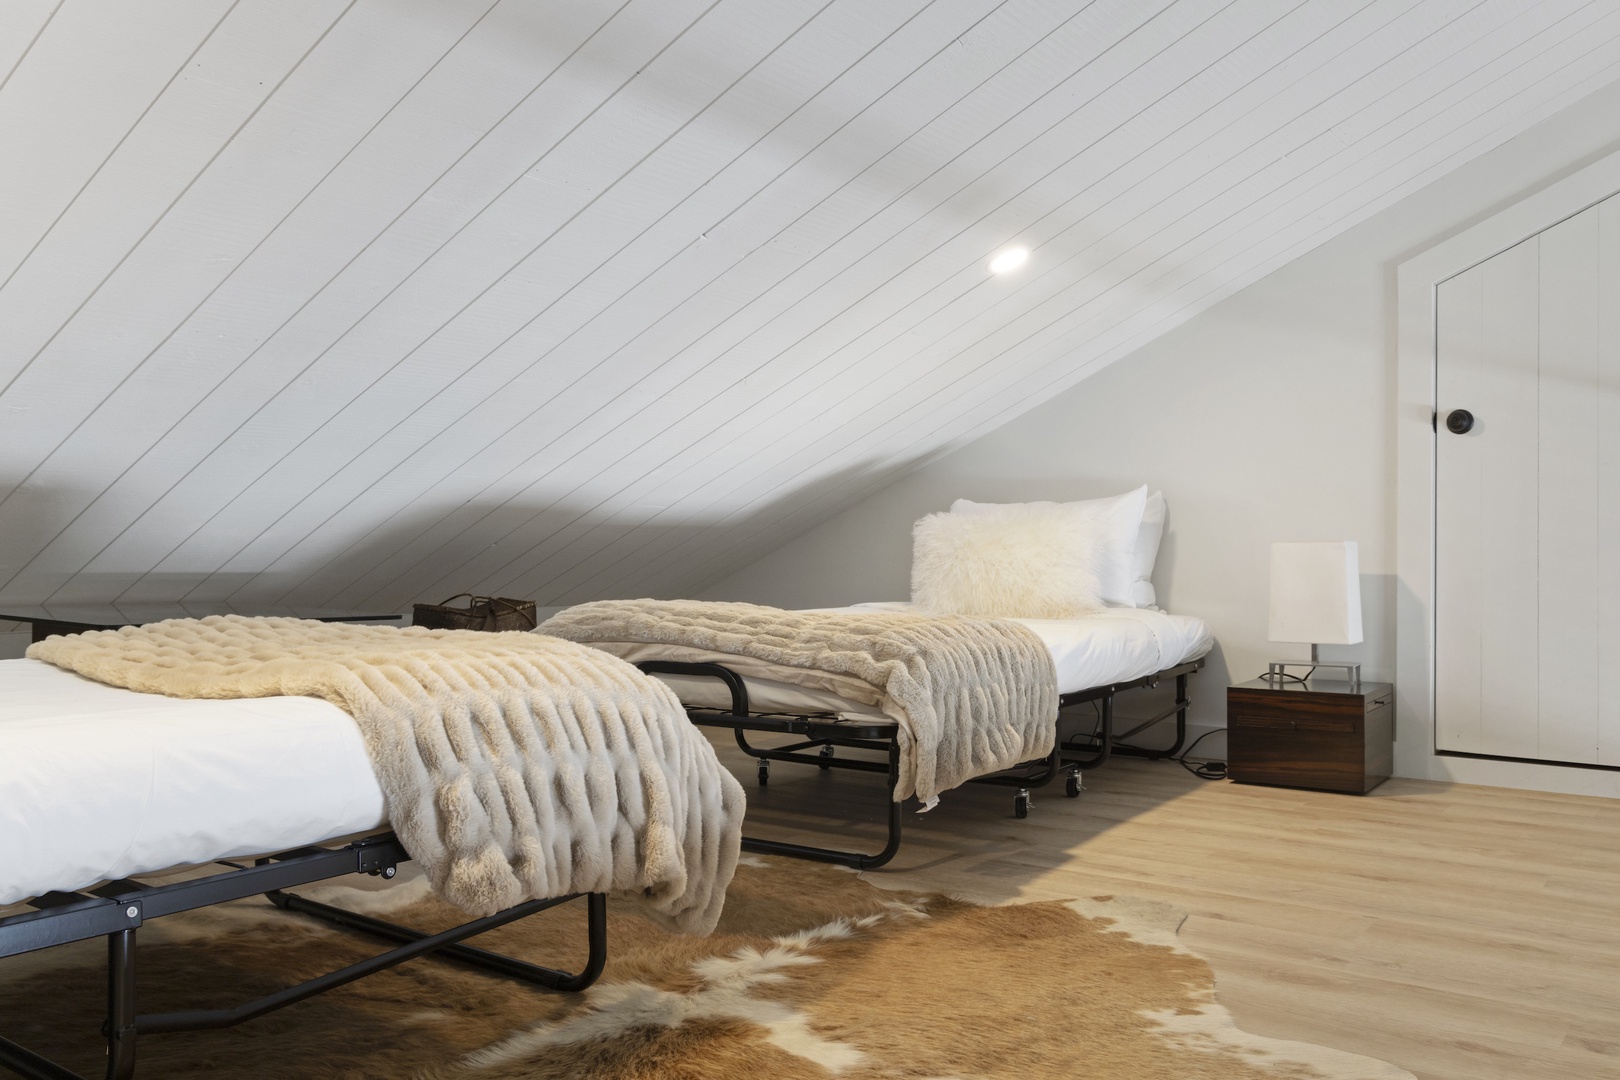 Loft with 2 cots - please note that the ceiling is sloped